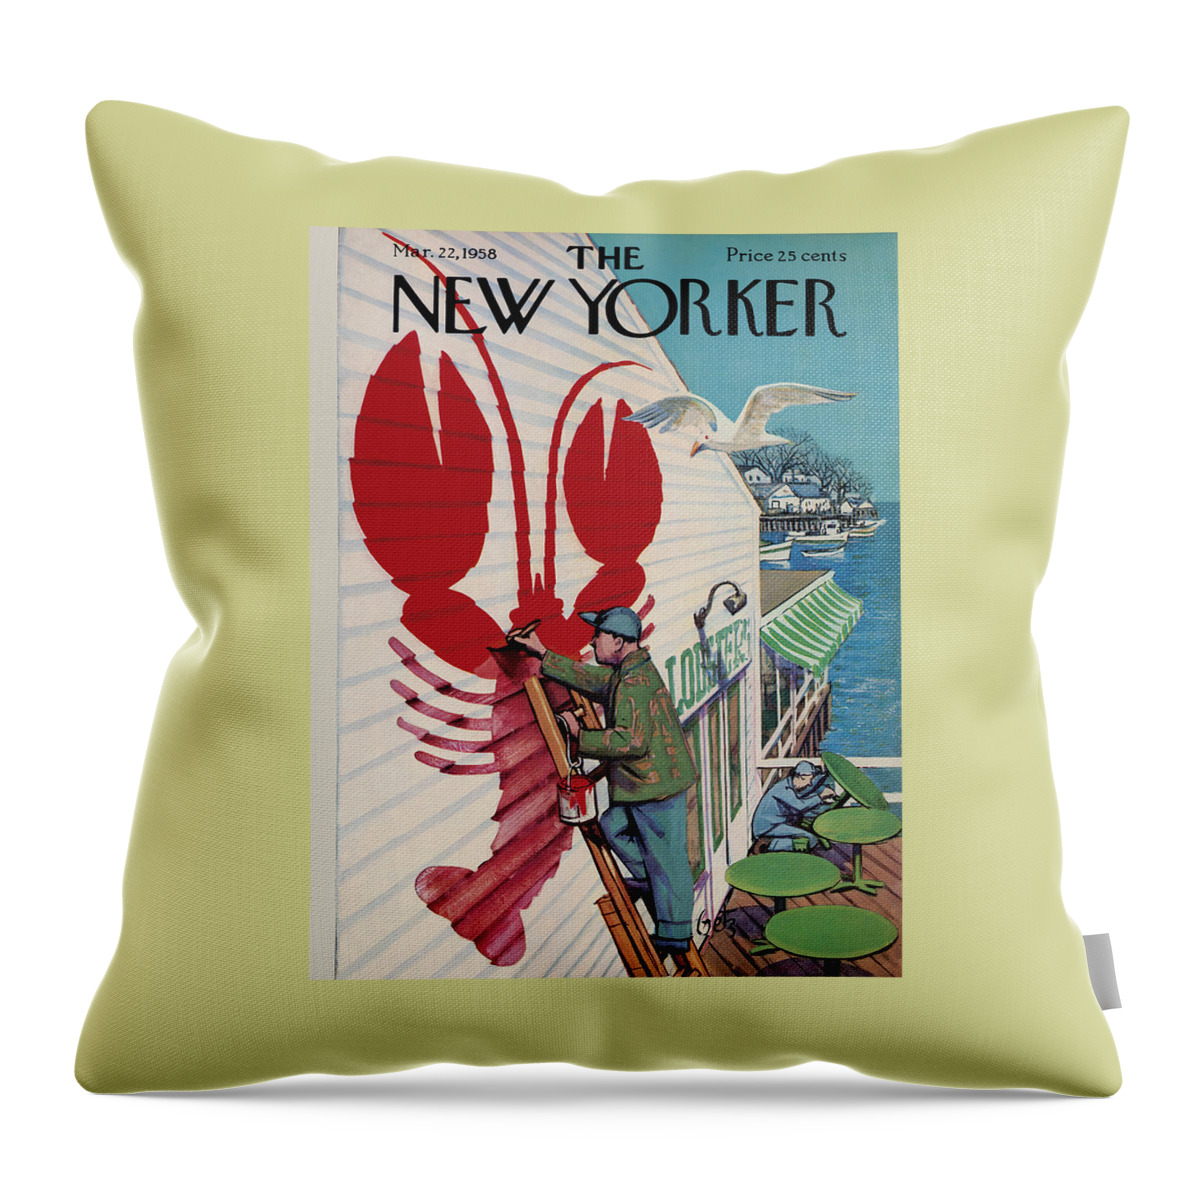 New Yorker March 22, 1958 Throw Pillow